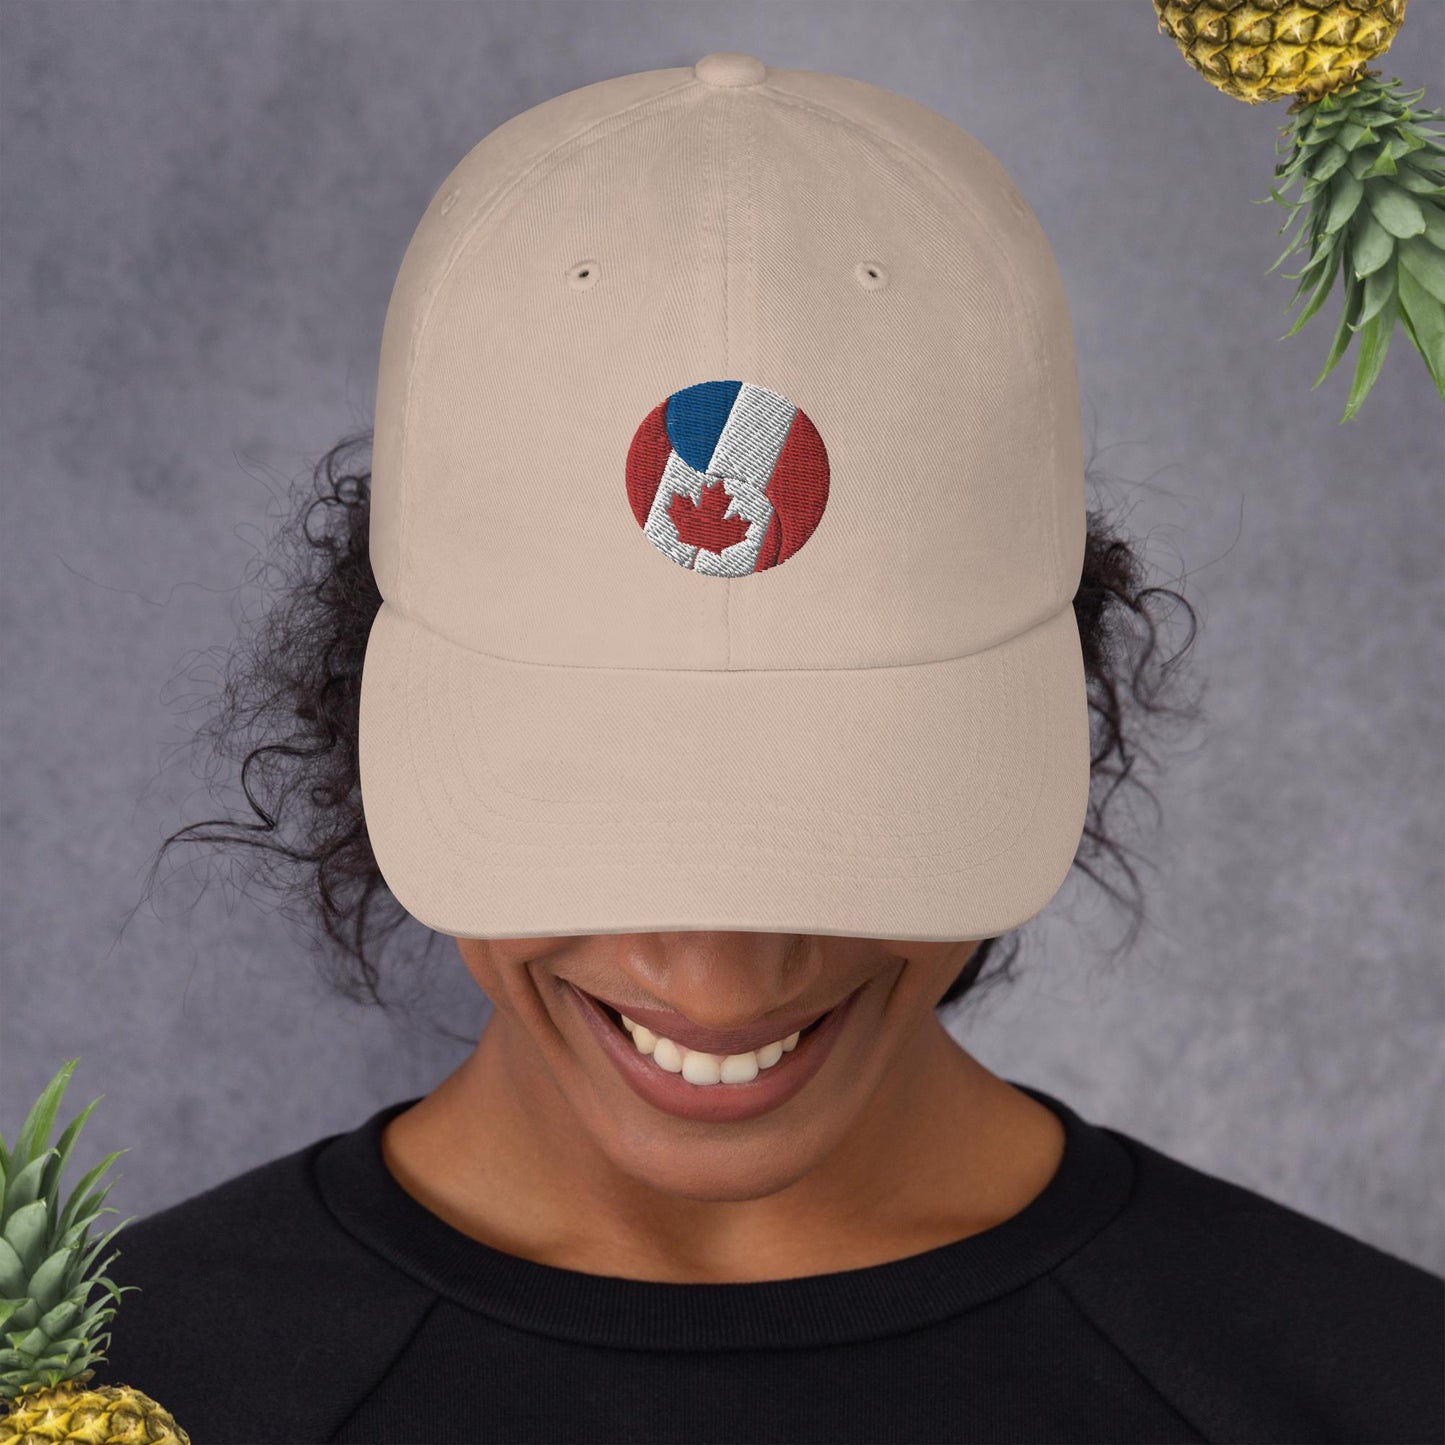 France-Can Pride hat